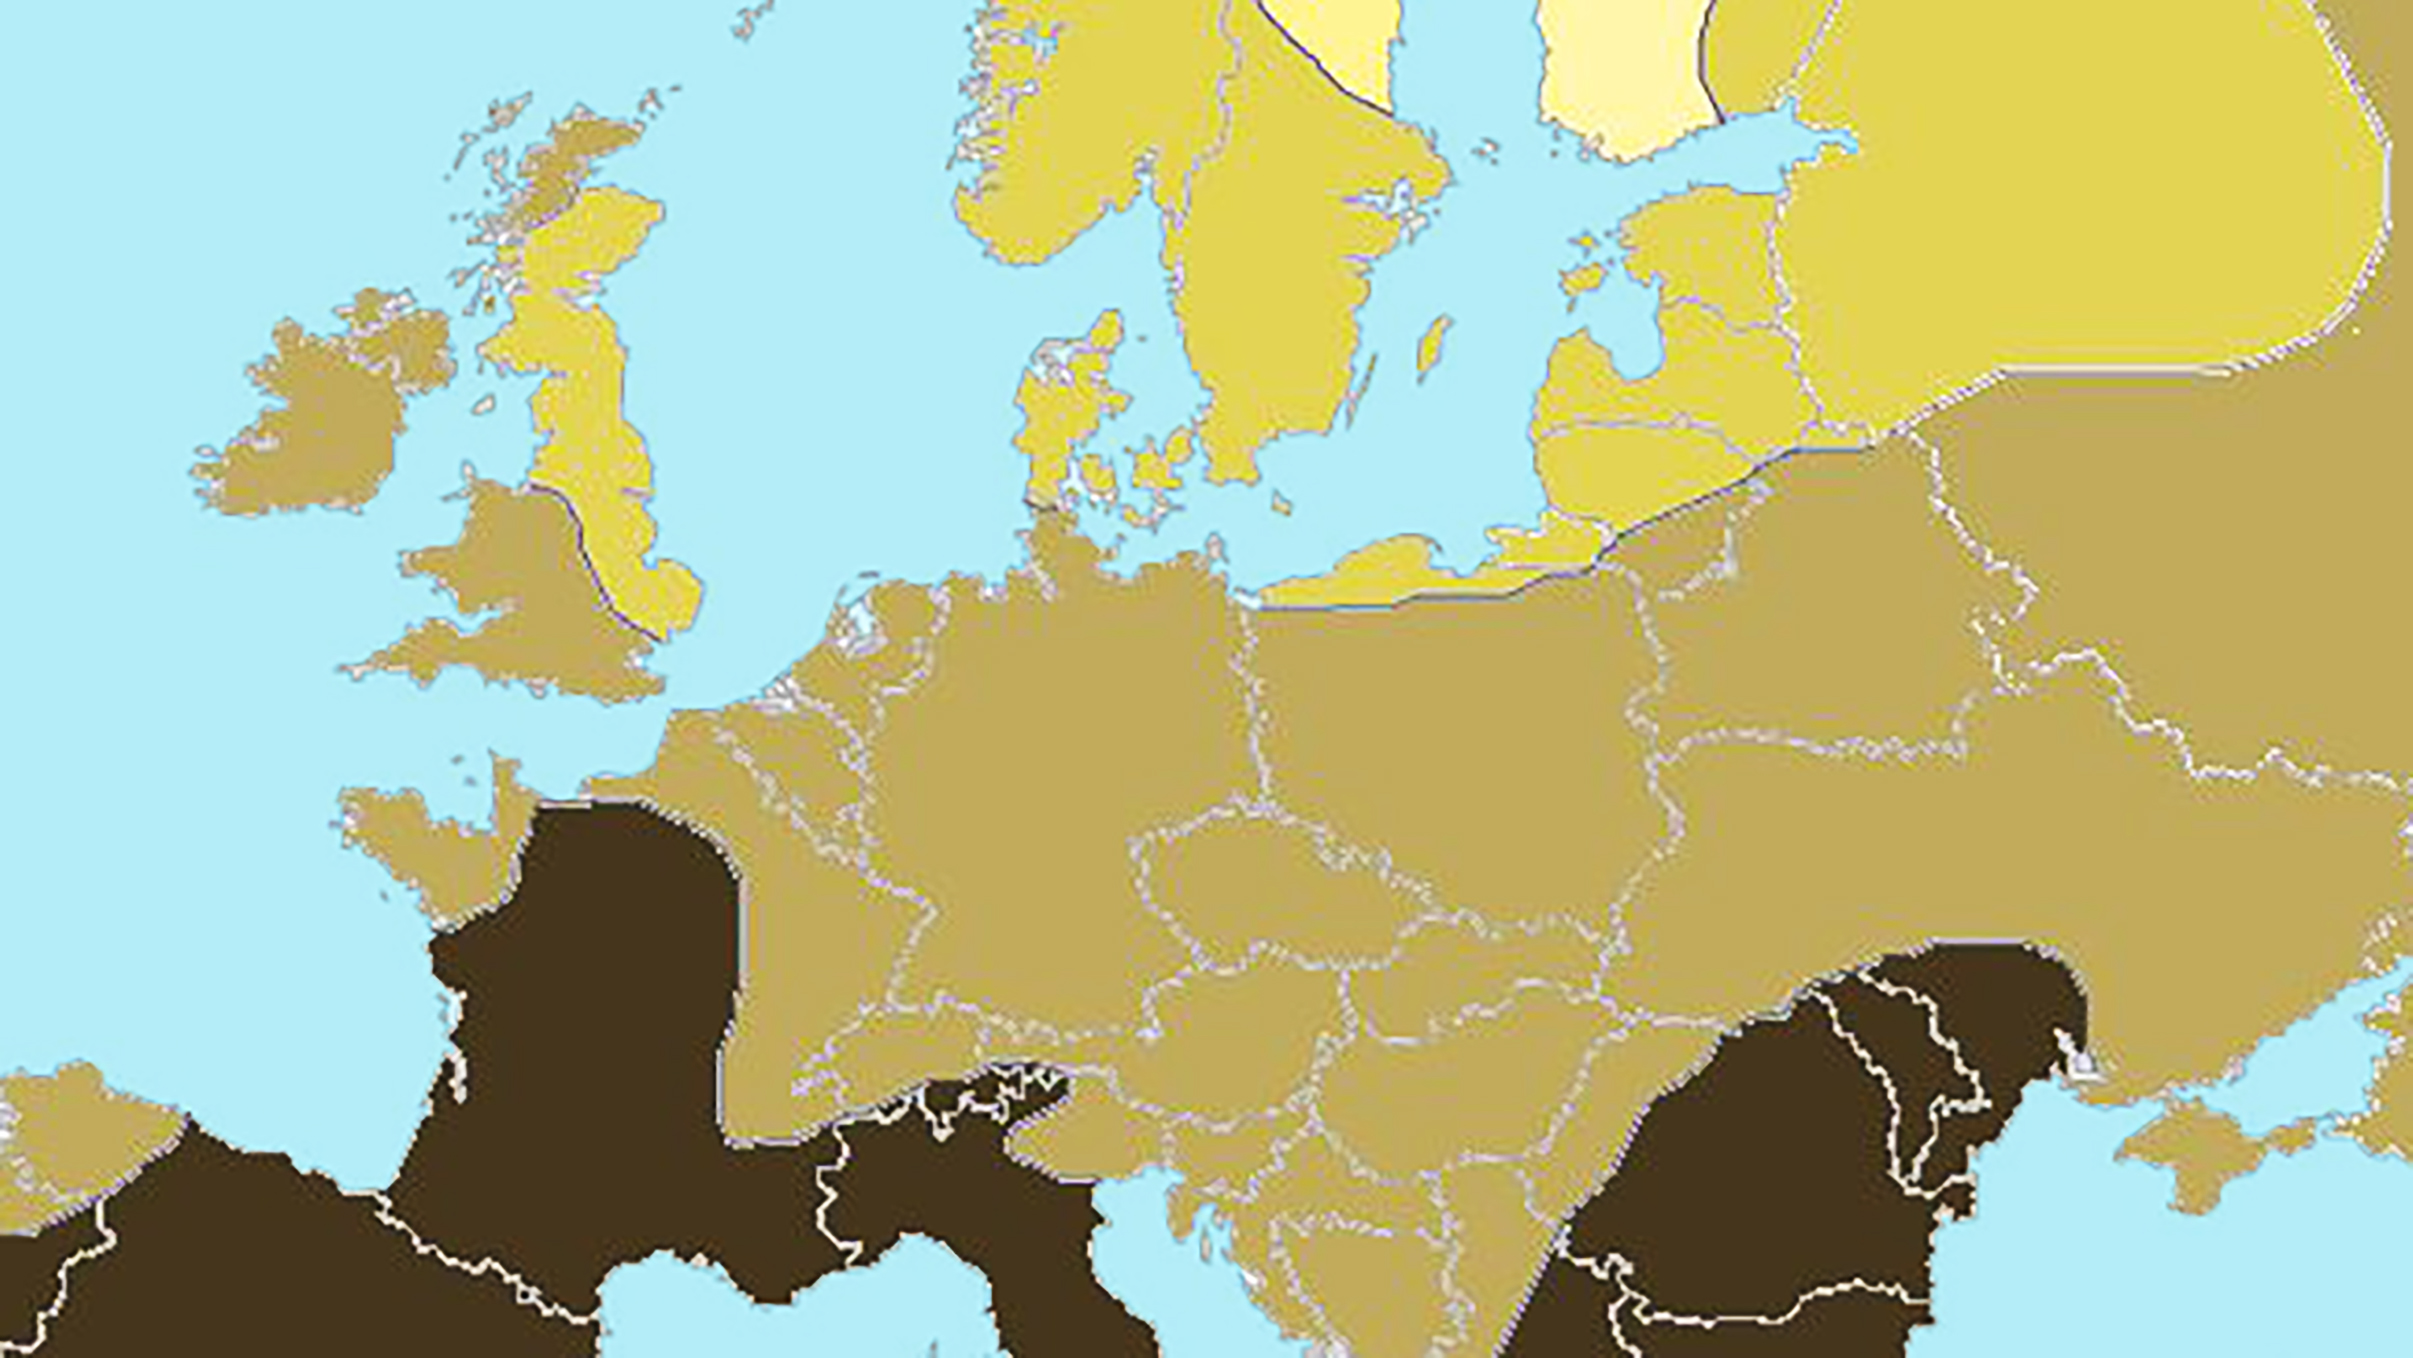 The Blonde vs. Brunette Map of Europe - Big Think